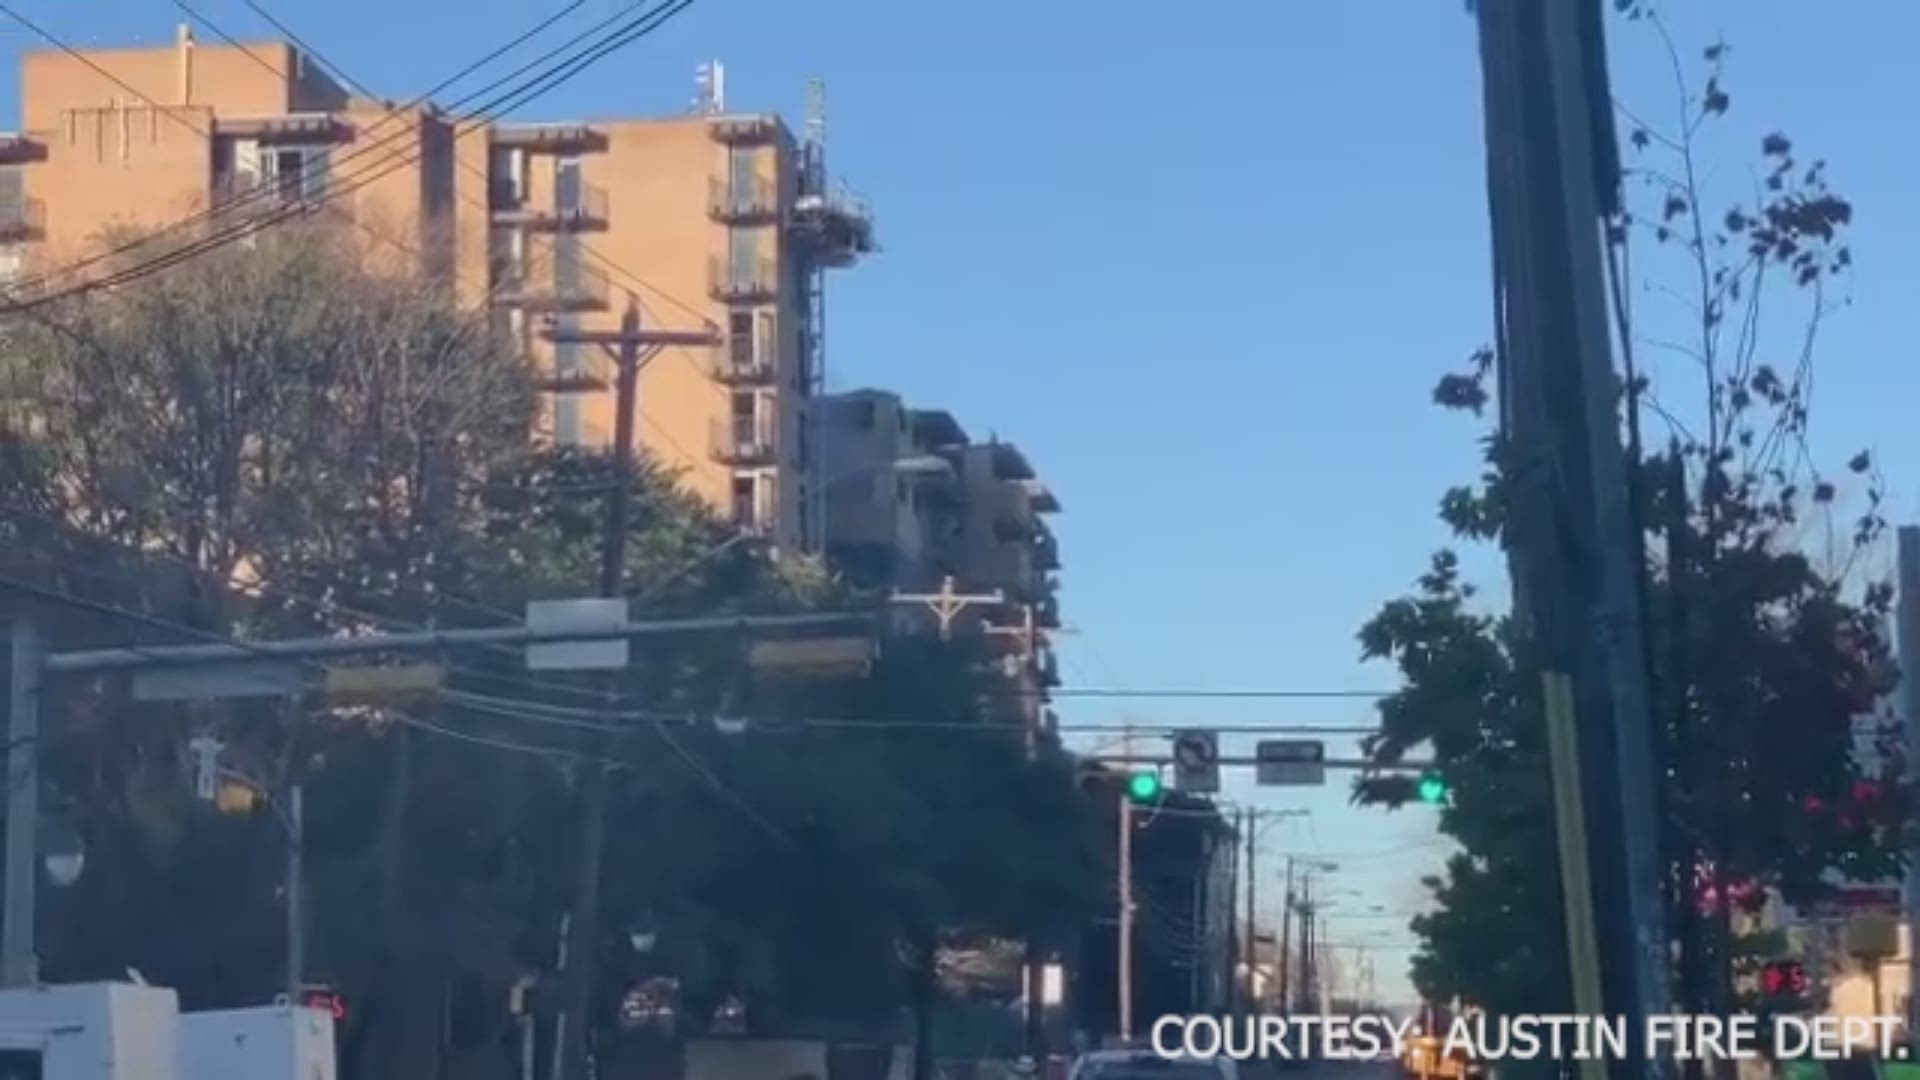 The building was imploded on Sunday morning. Video courtesy of the Austin Fire Department.